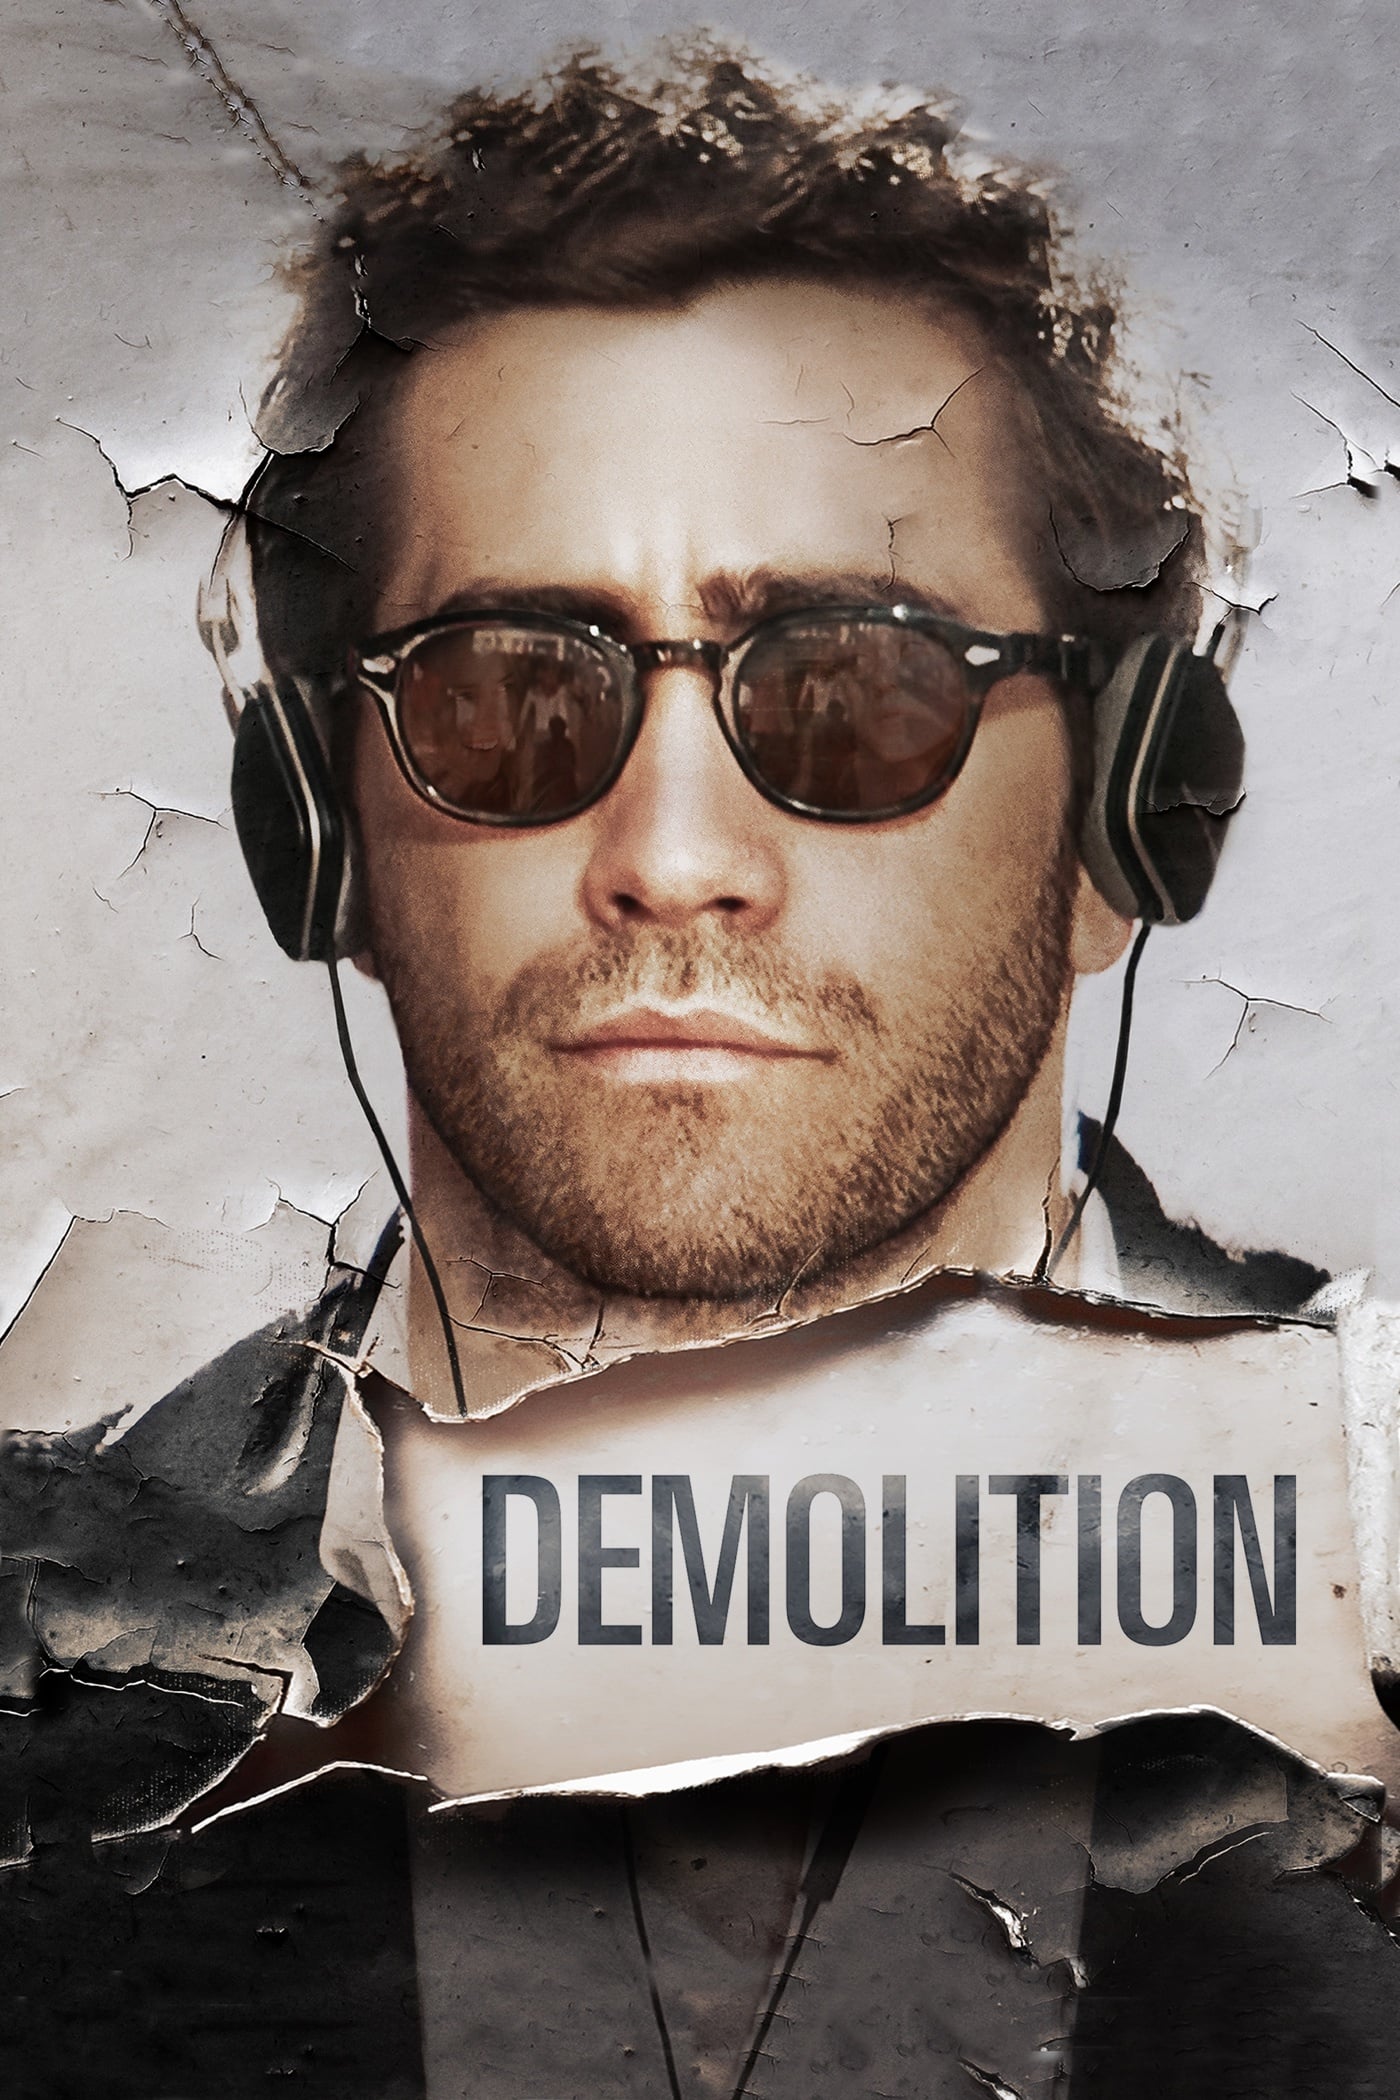 Demolition download the new